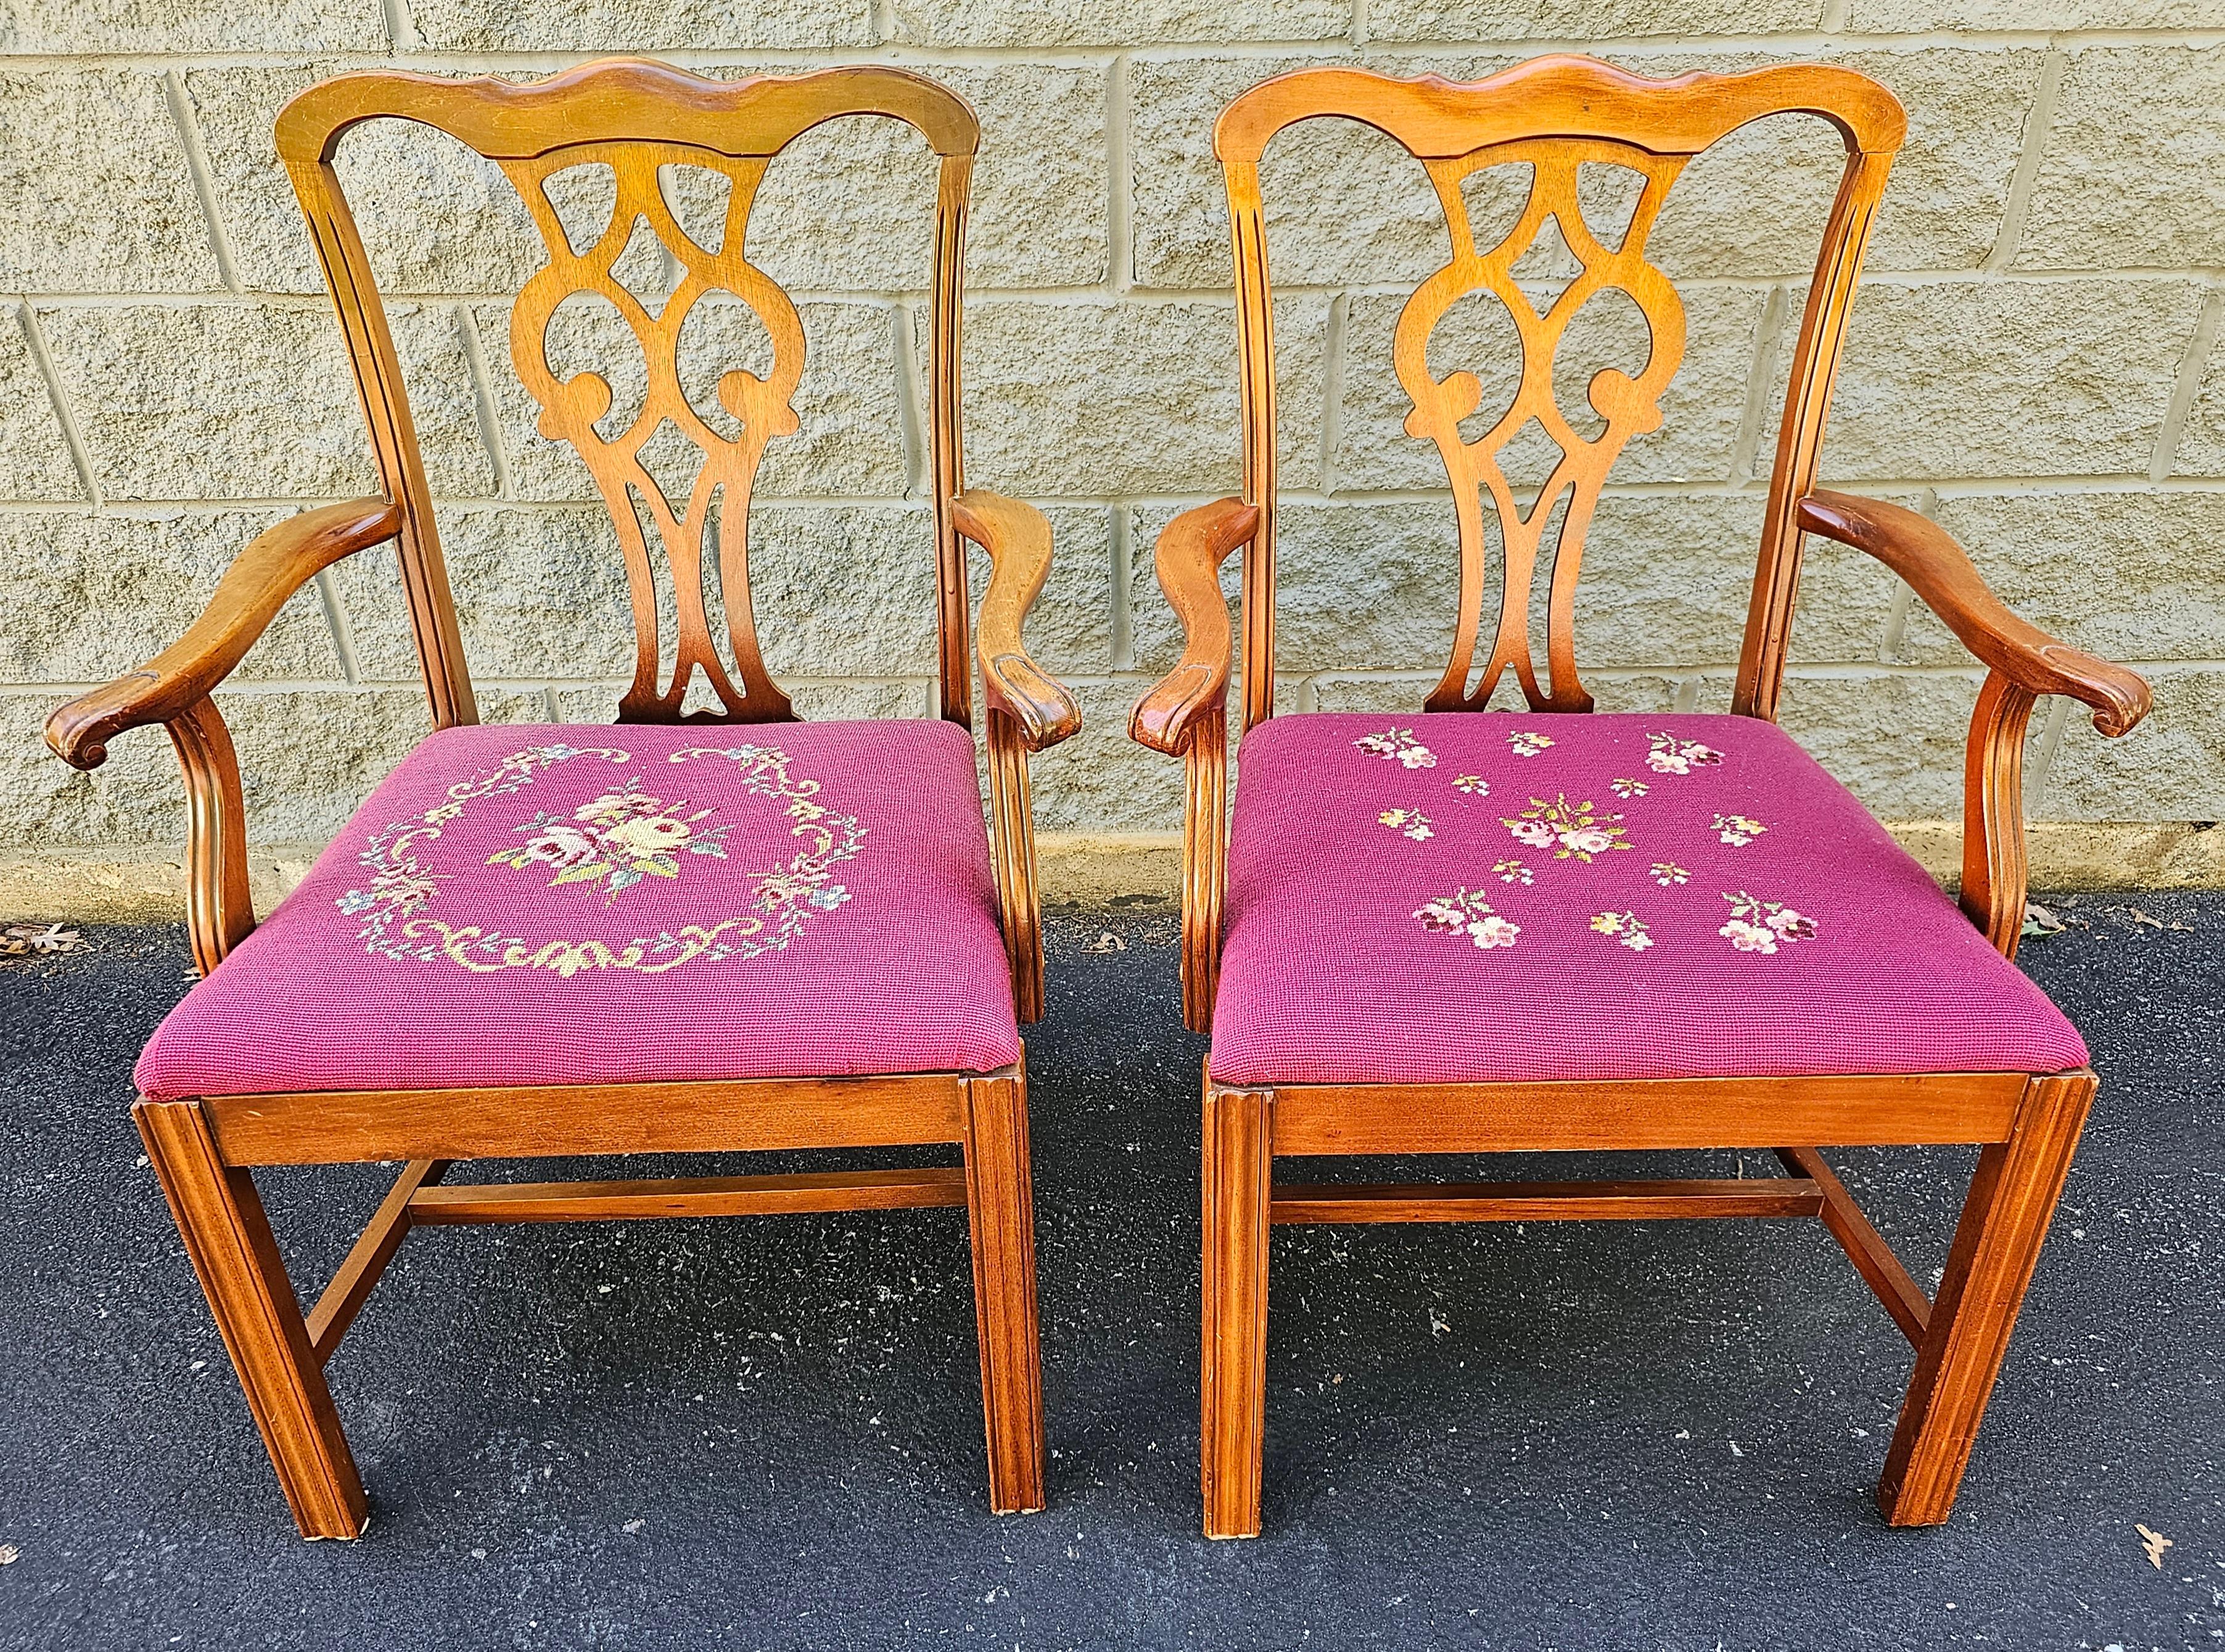 Pair of Stateville Chair Company Mid-Century Chippendale Mahogany Needflepoint ArmChairs. 
Very good vintage condition. Measures 25.5